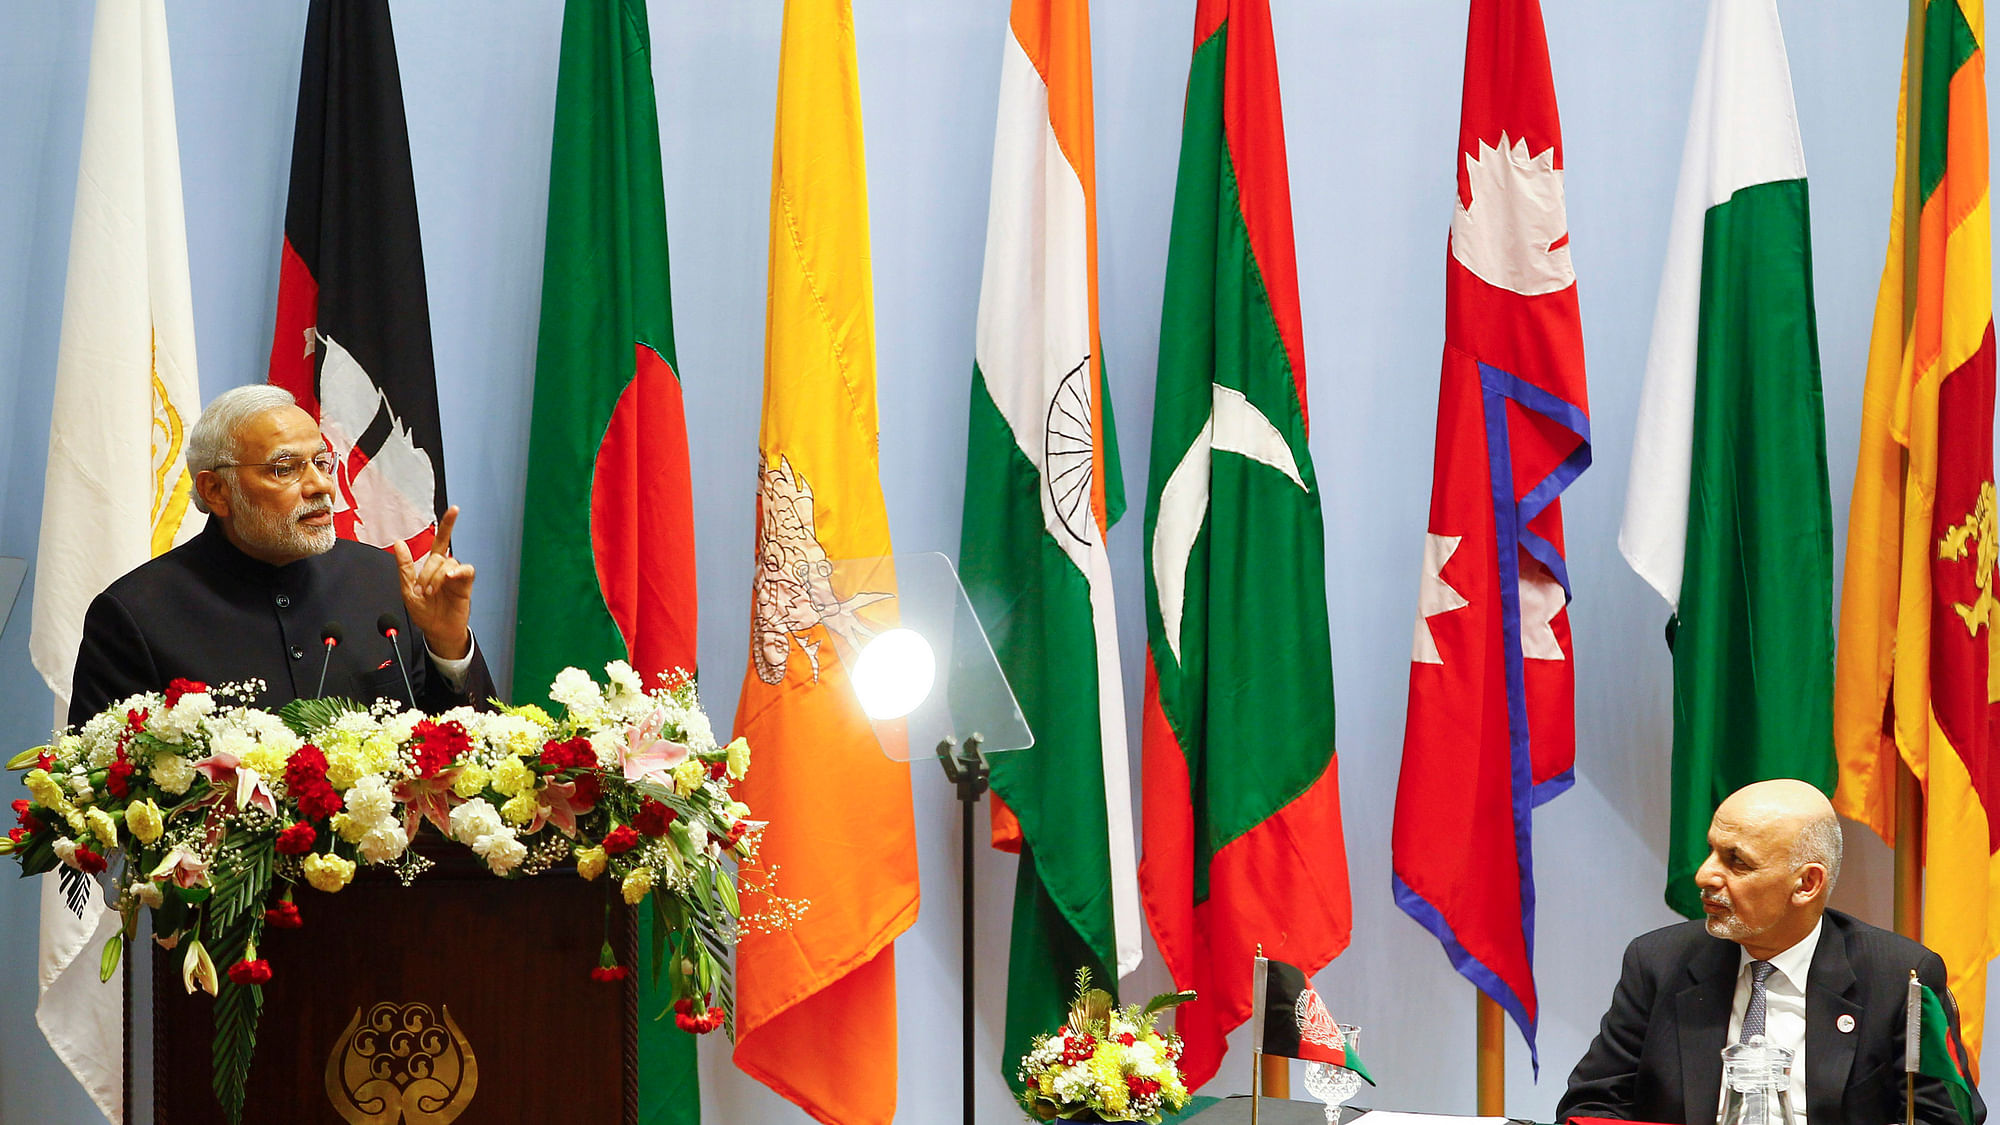 MEA announced that PM Modi will be skipping the SAARC summit. (Photo: Reuters)